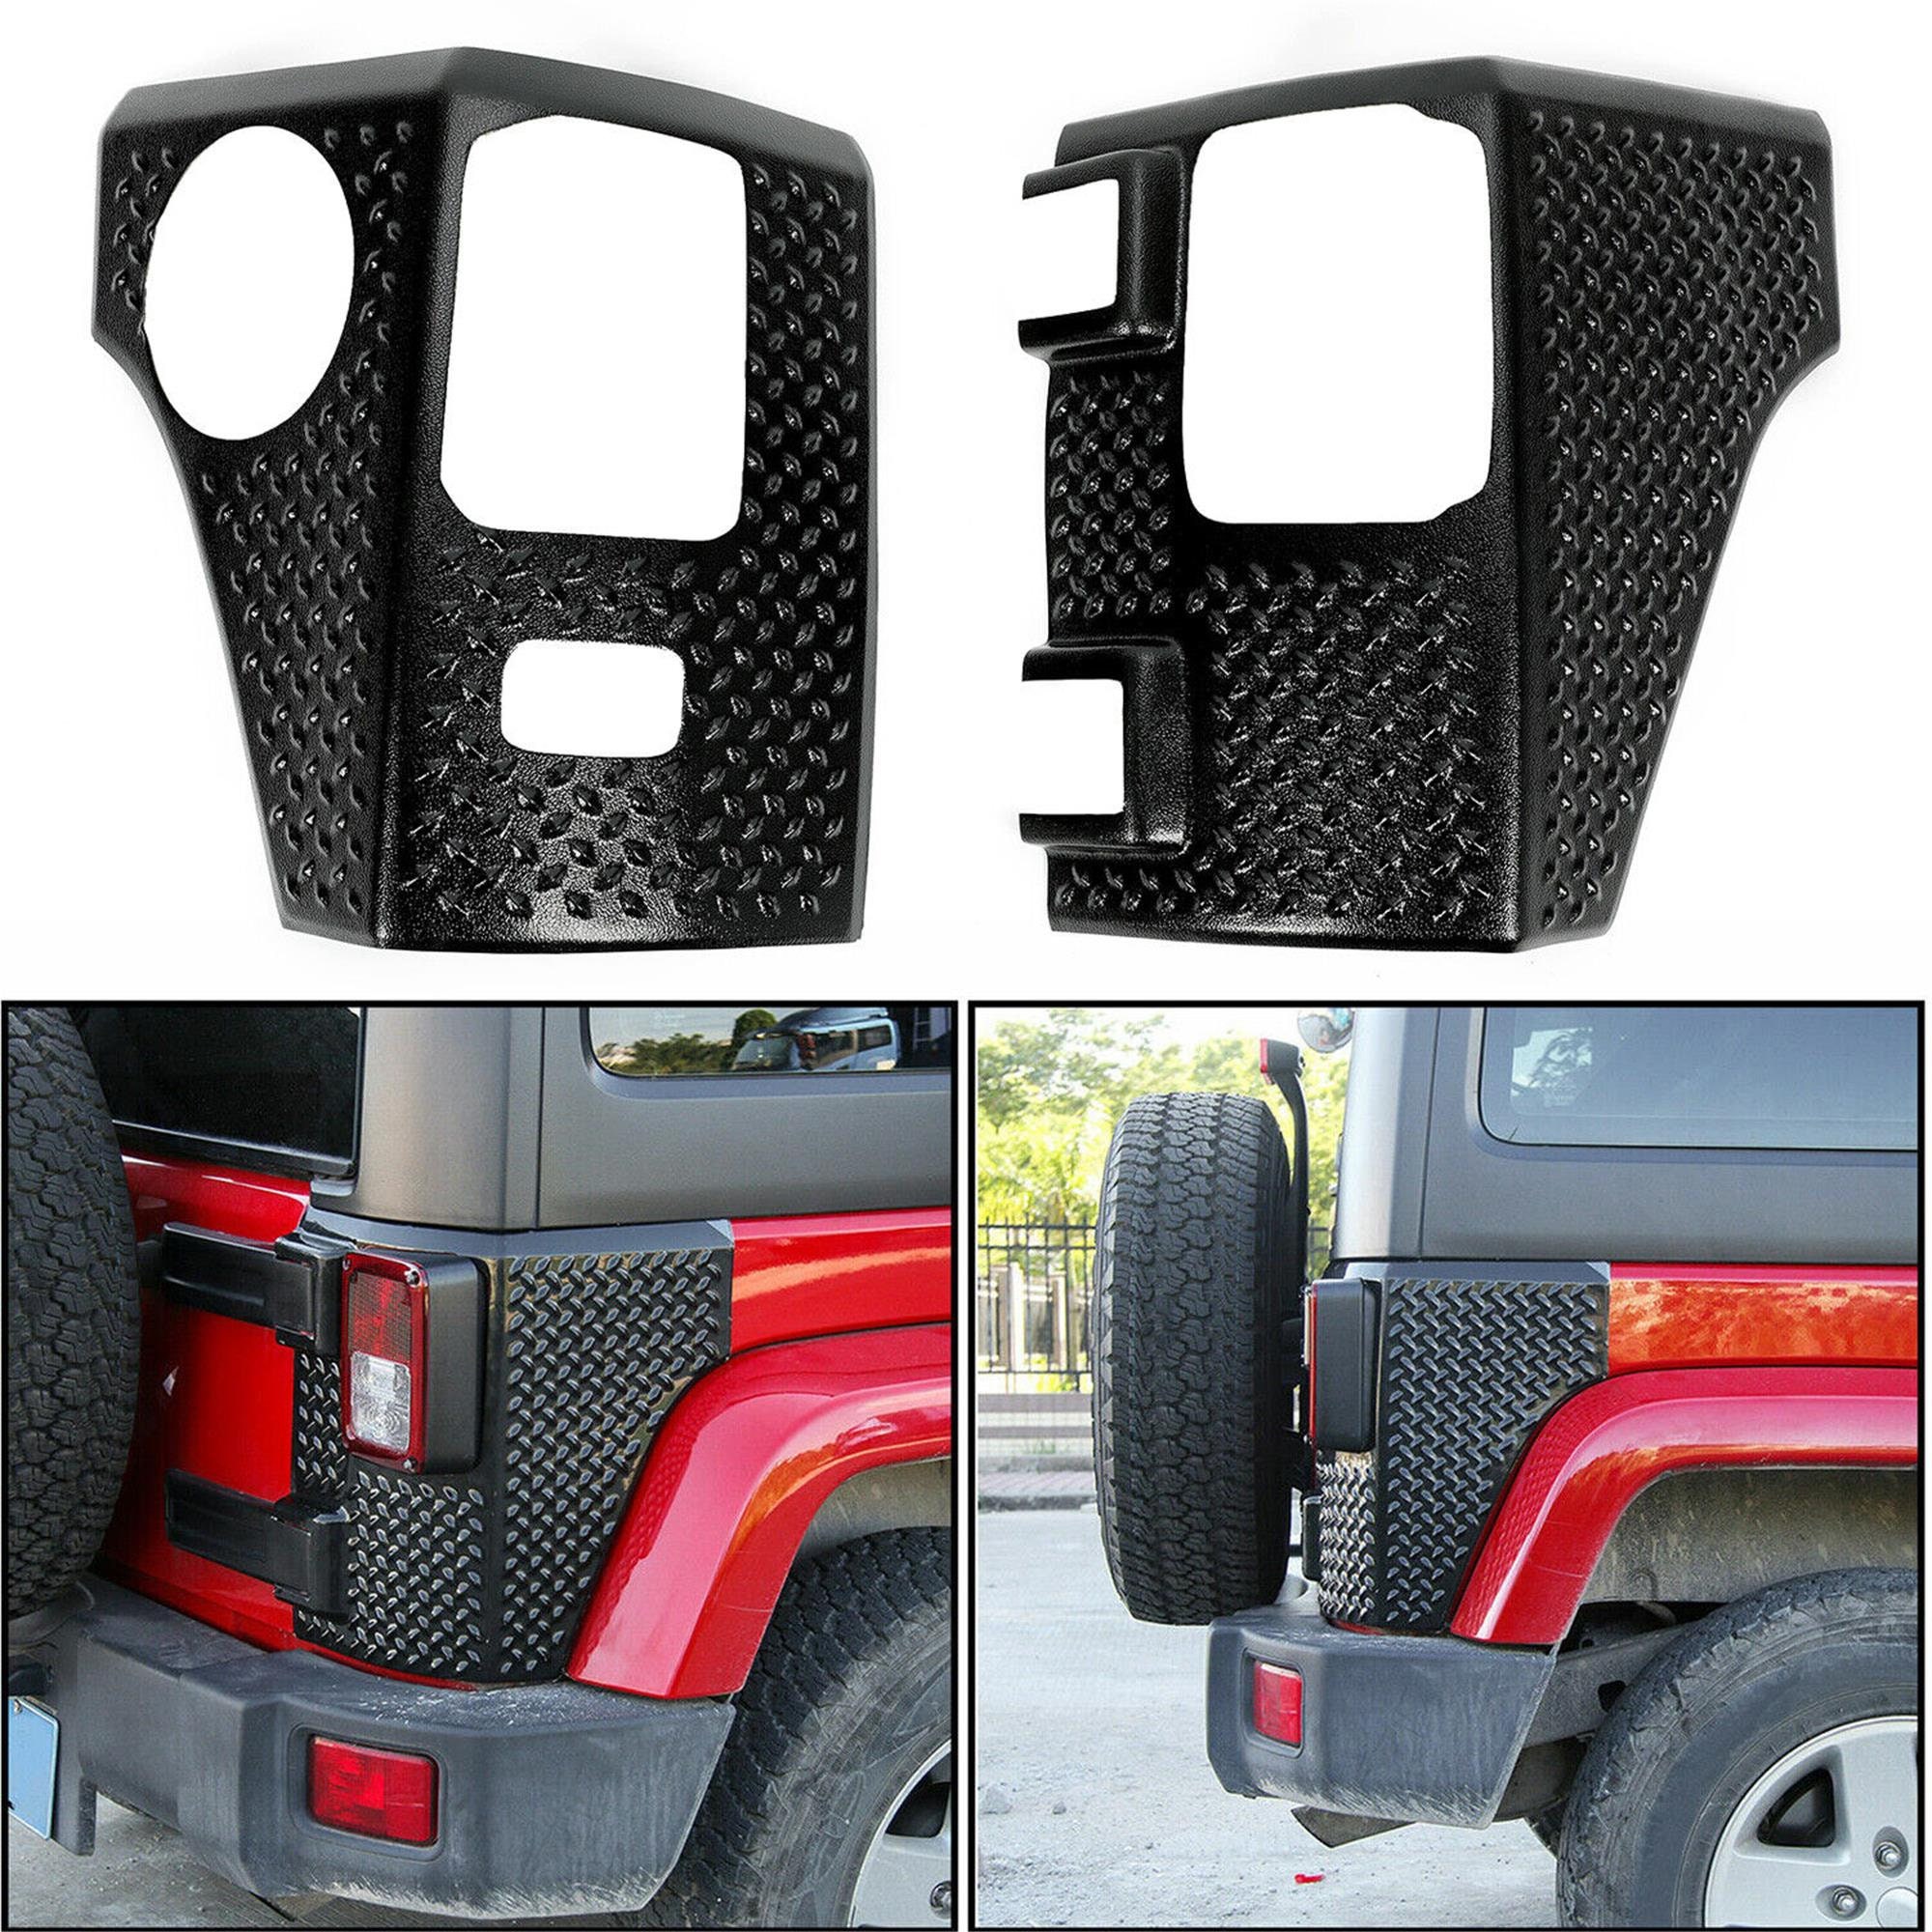 Jeep Wrangler Cowl Covers Etsy